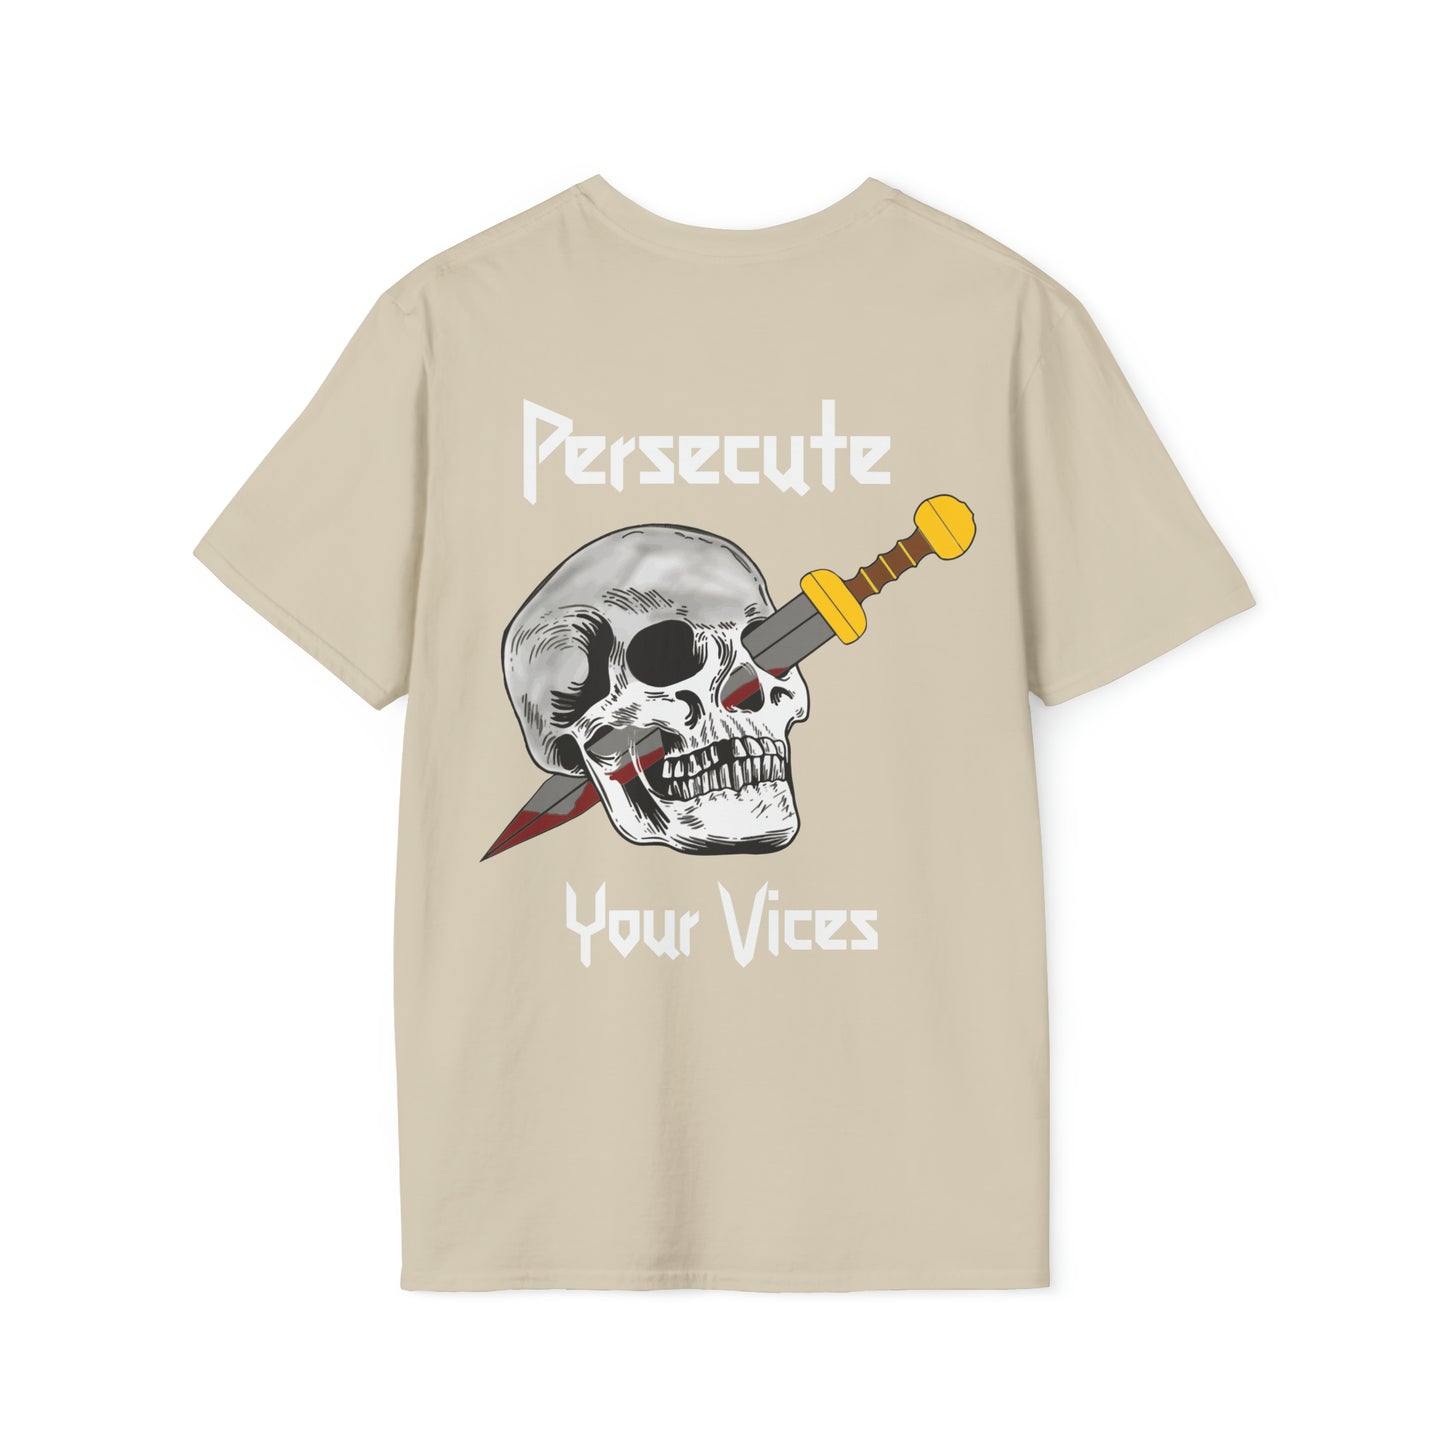 Persecute Your Vices T-Shirt